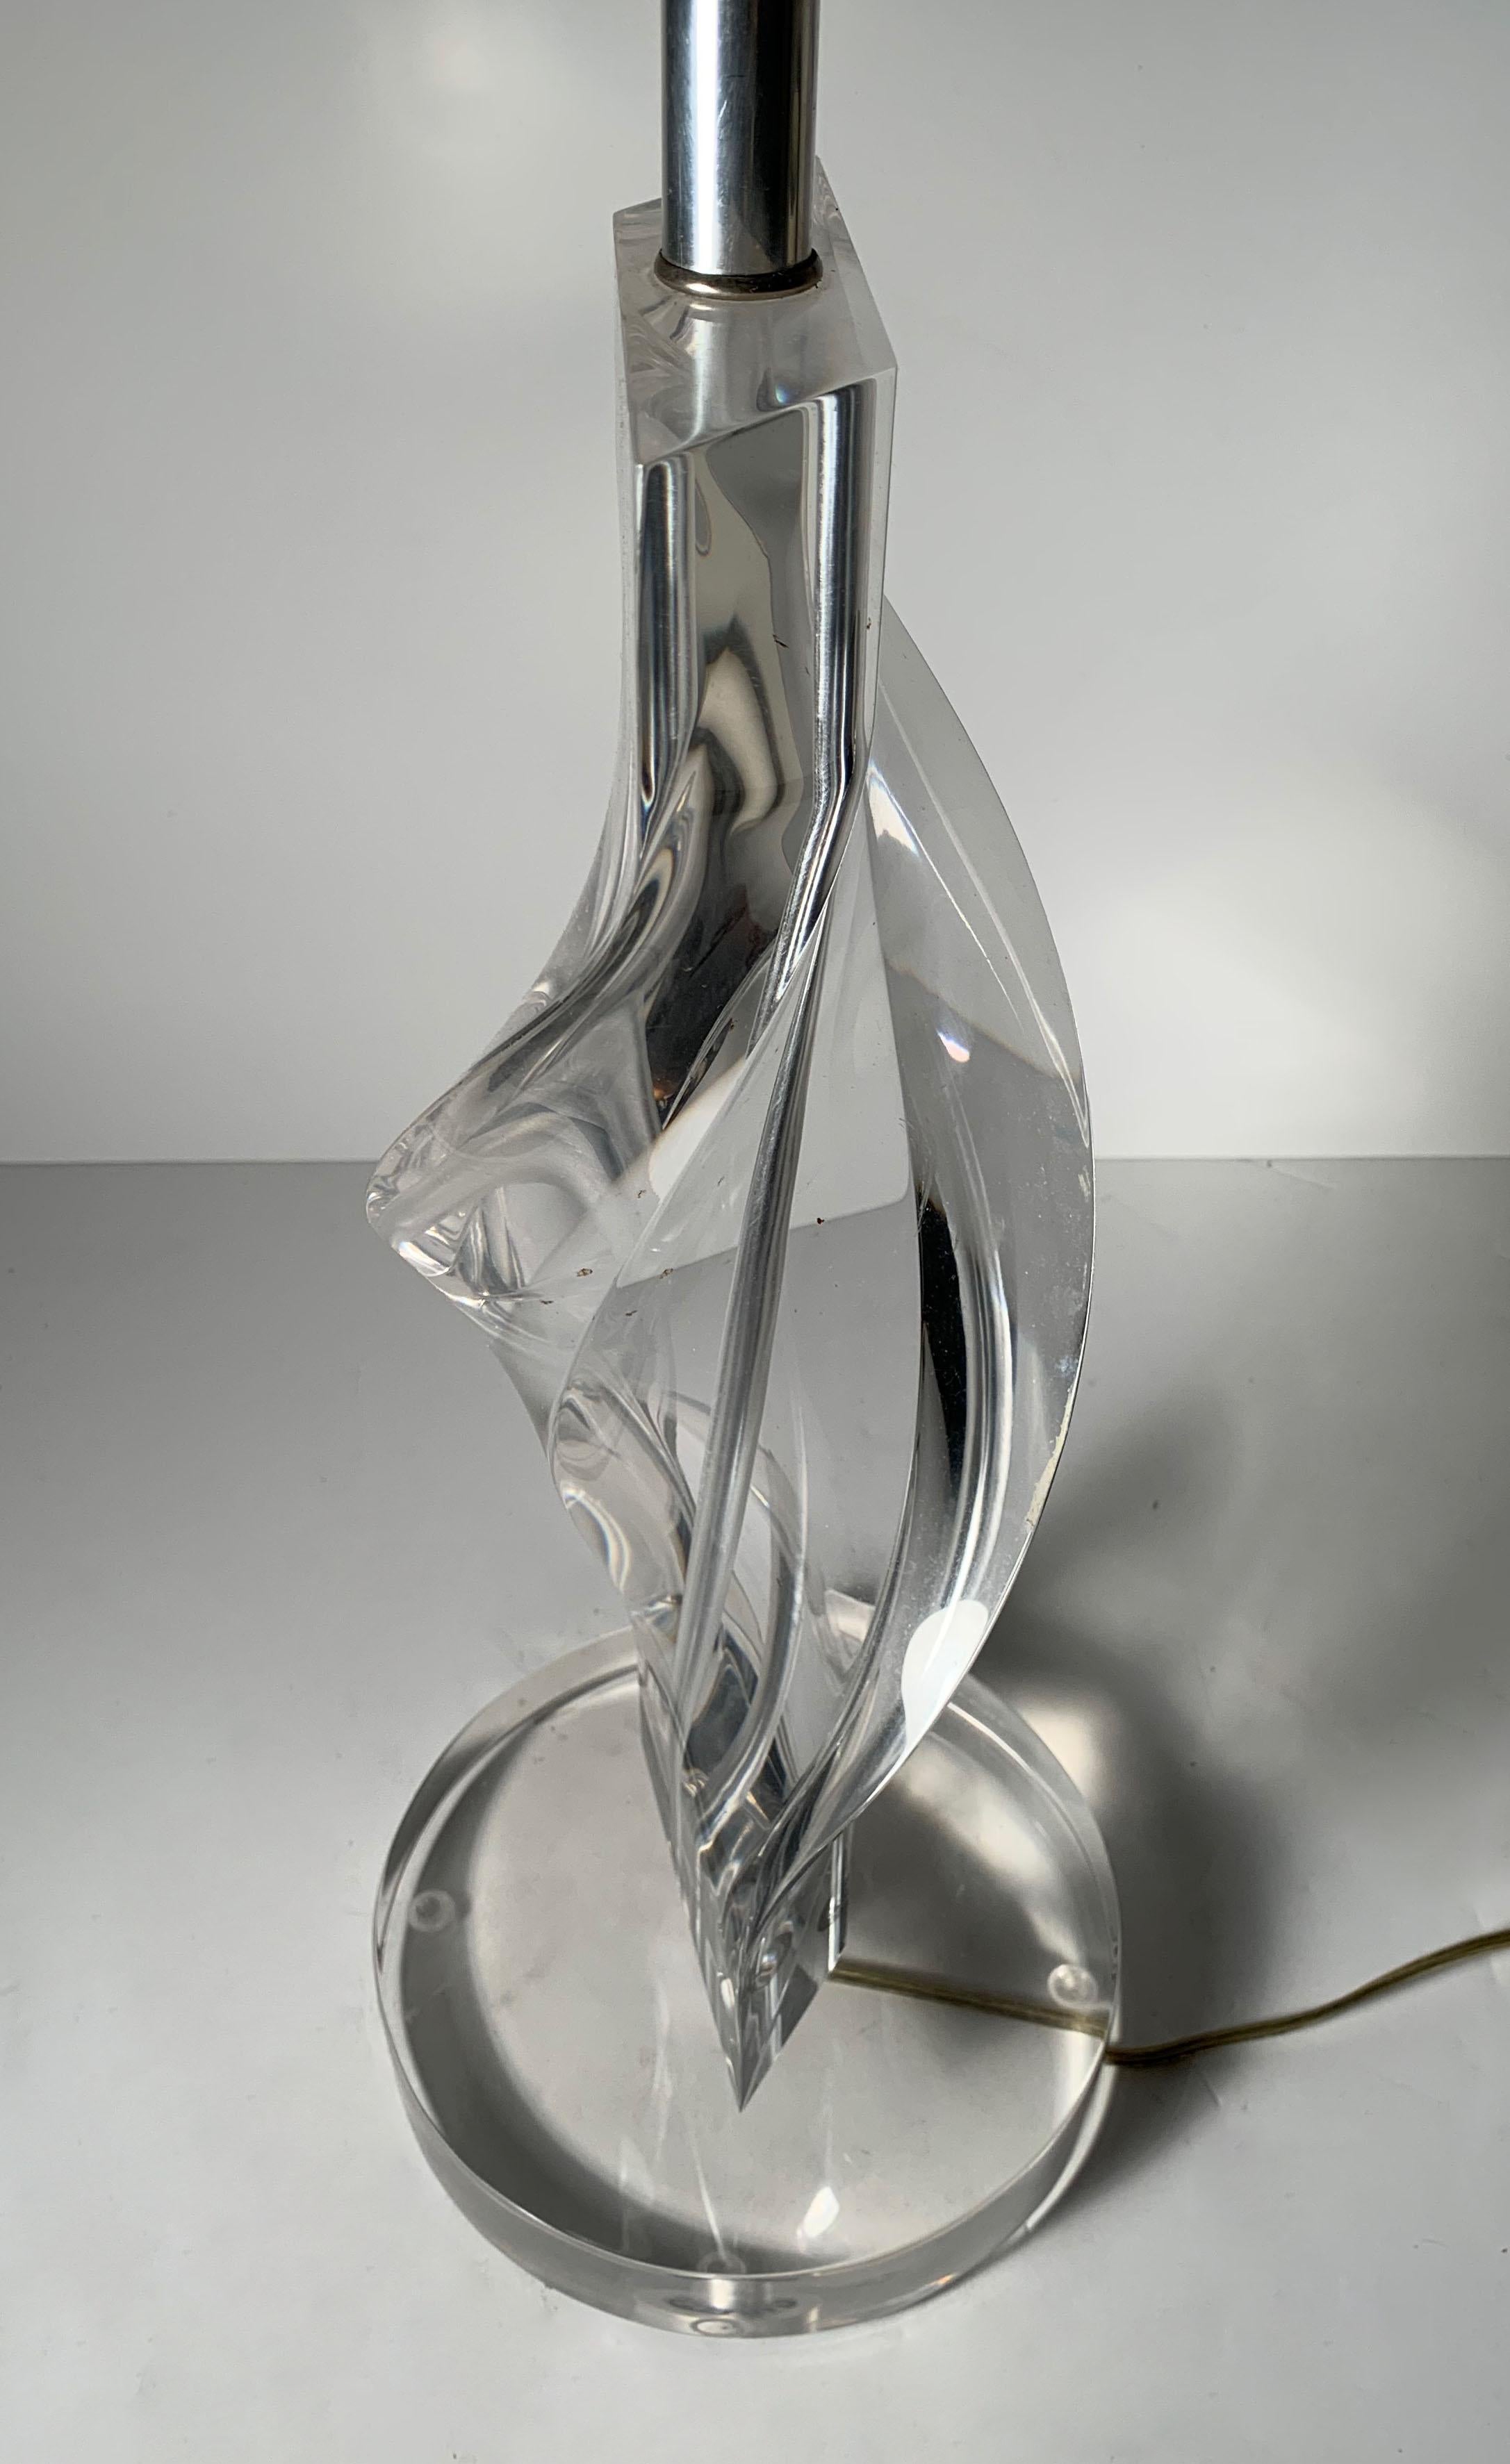 Mid-Century Modern Vintage Lucite Helix Twist Lamp by Herbert Ritts for Astrolite California For Sale